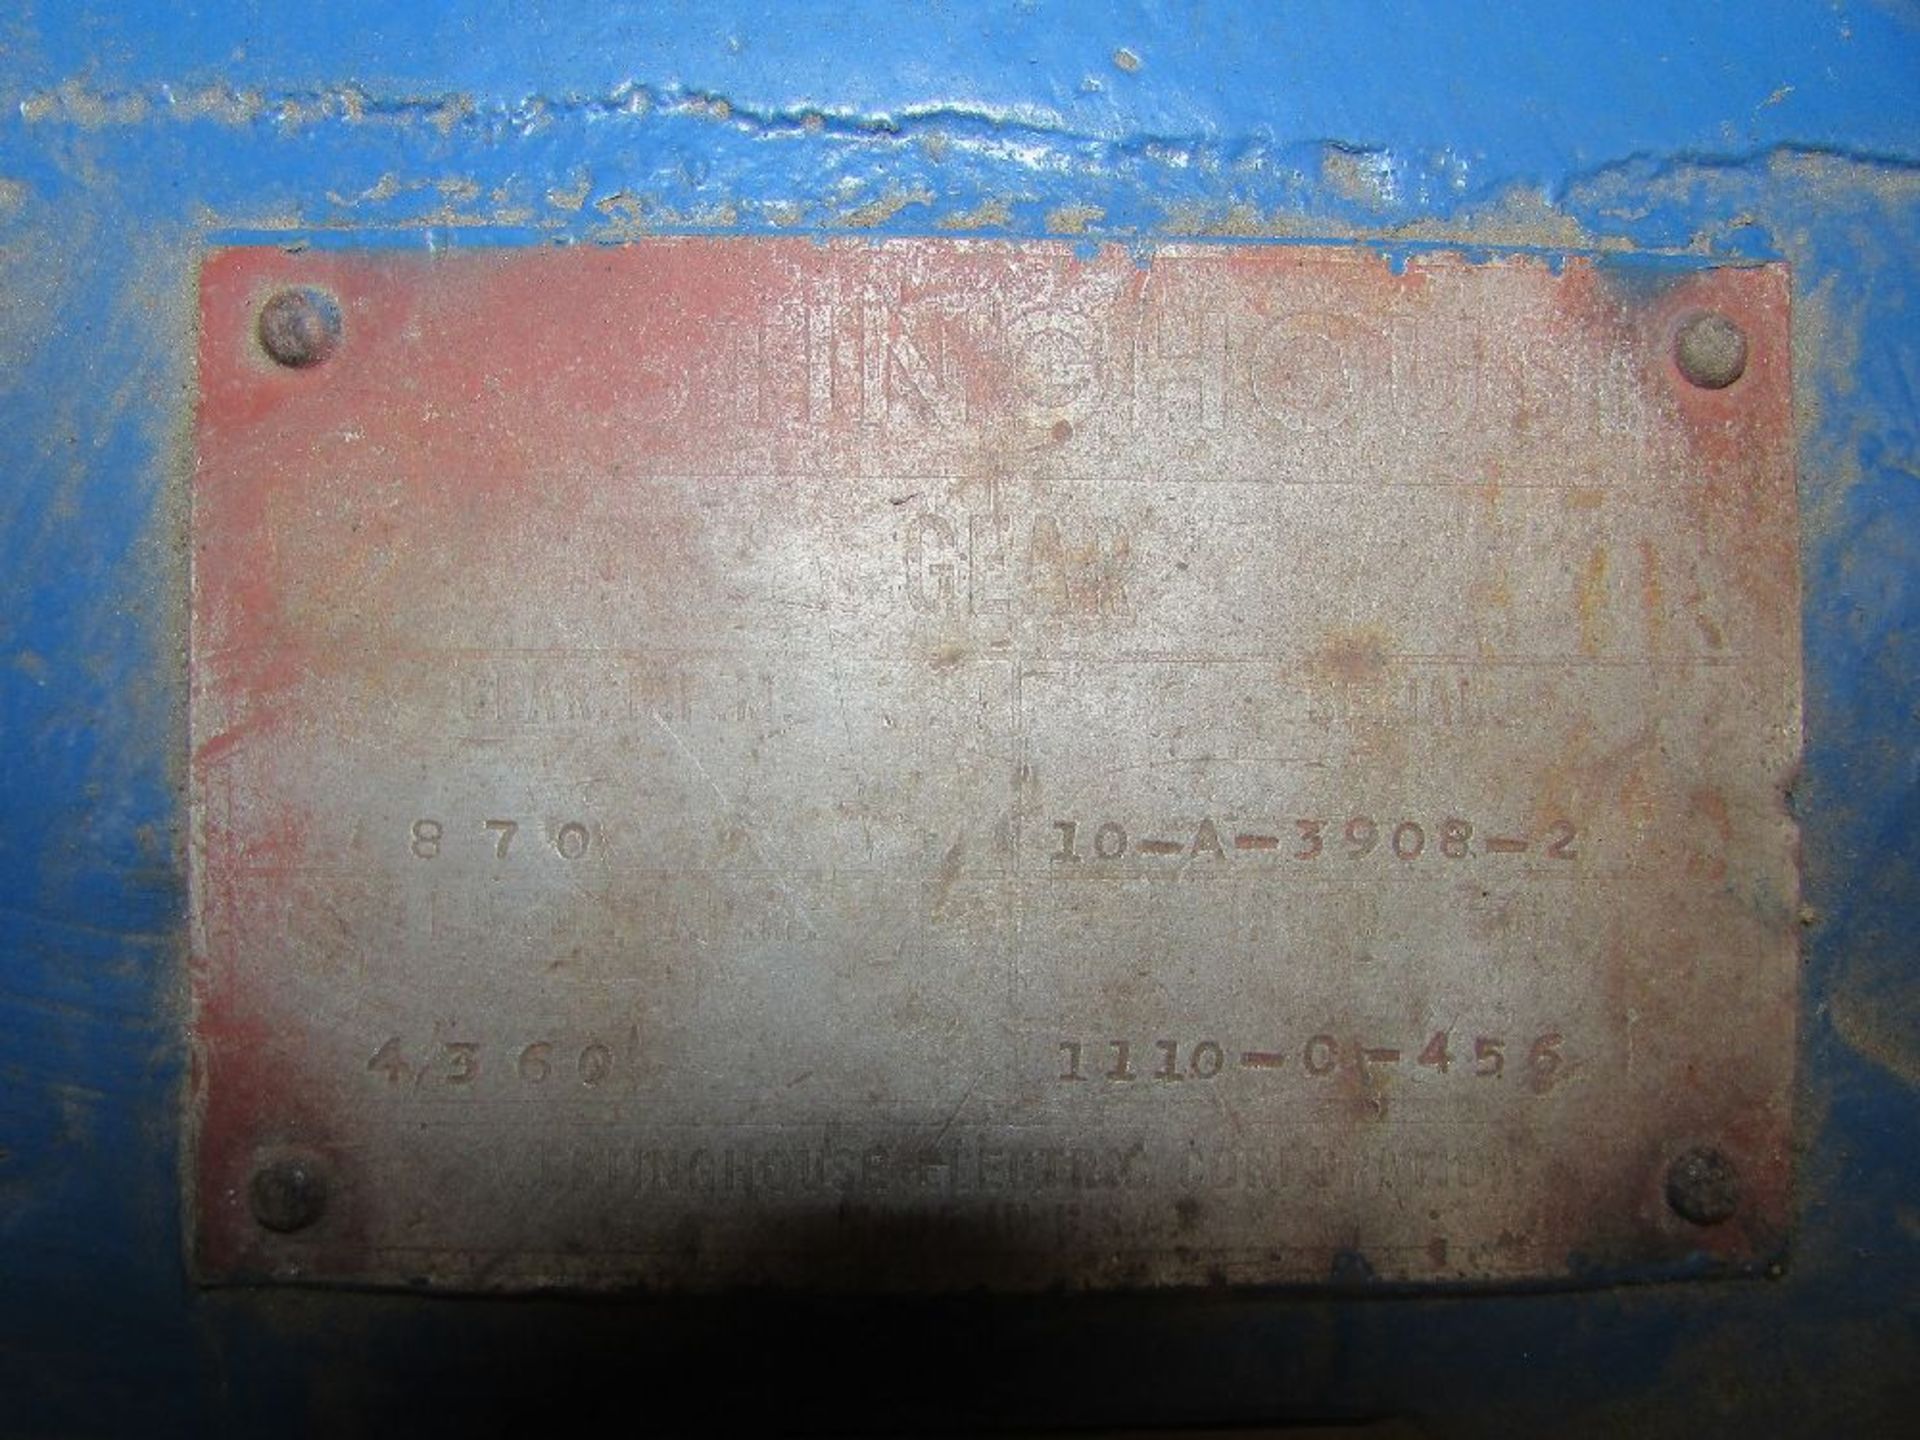 Westinghouse Gear Box - Image 6 of 6